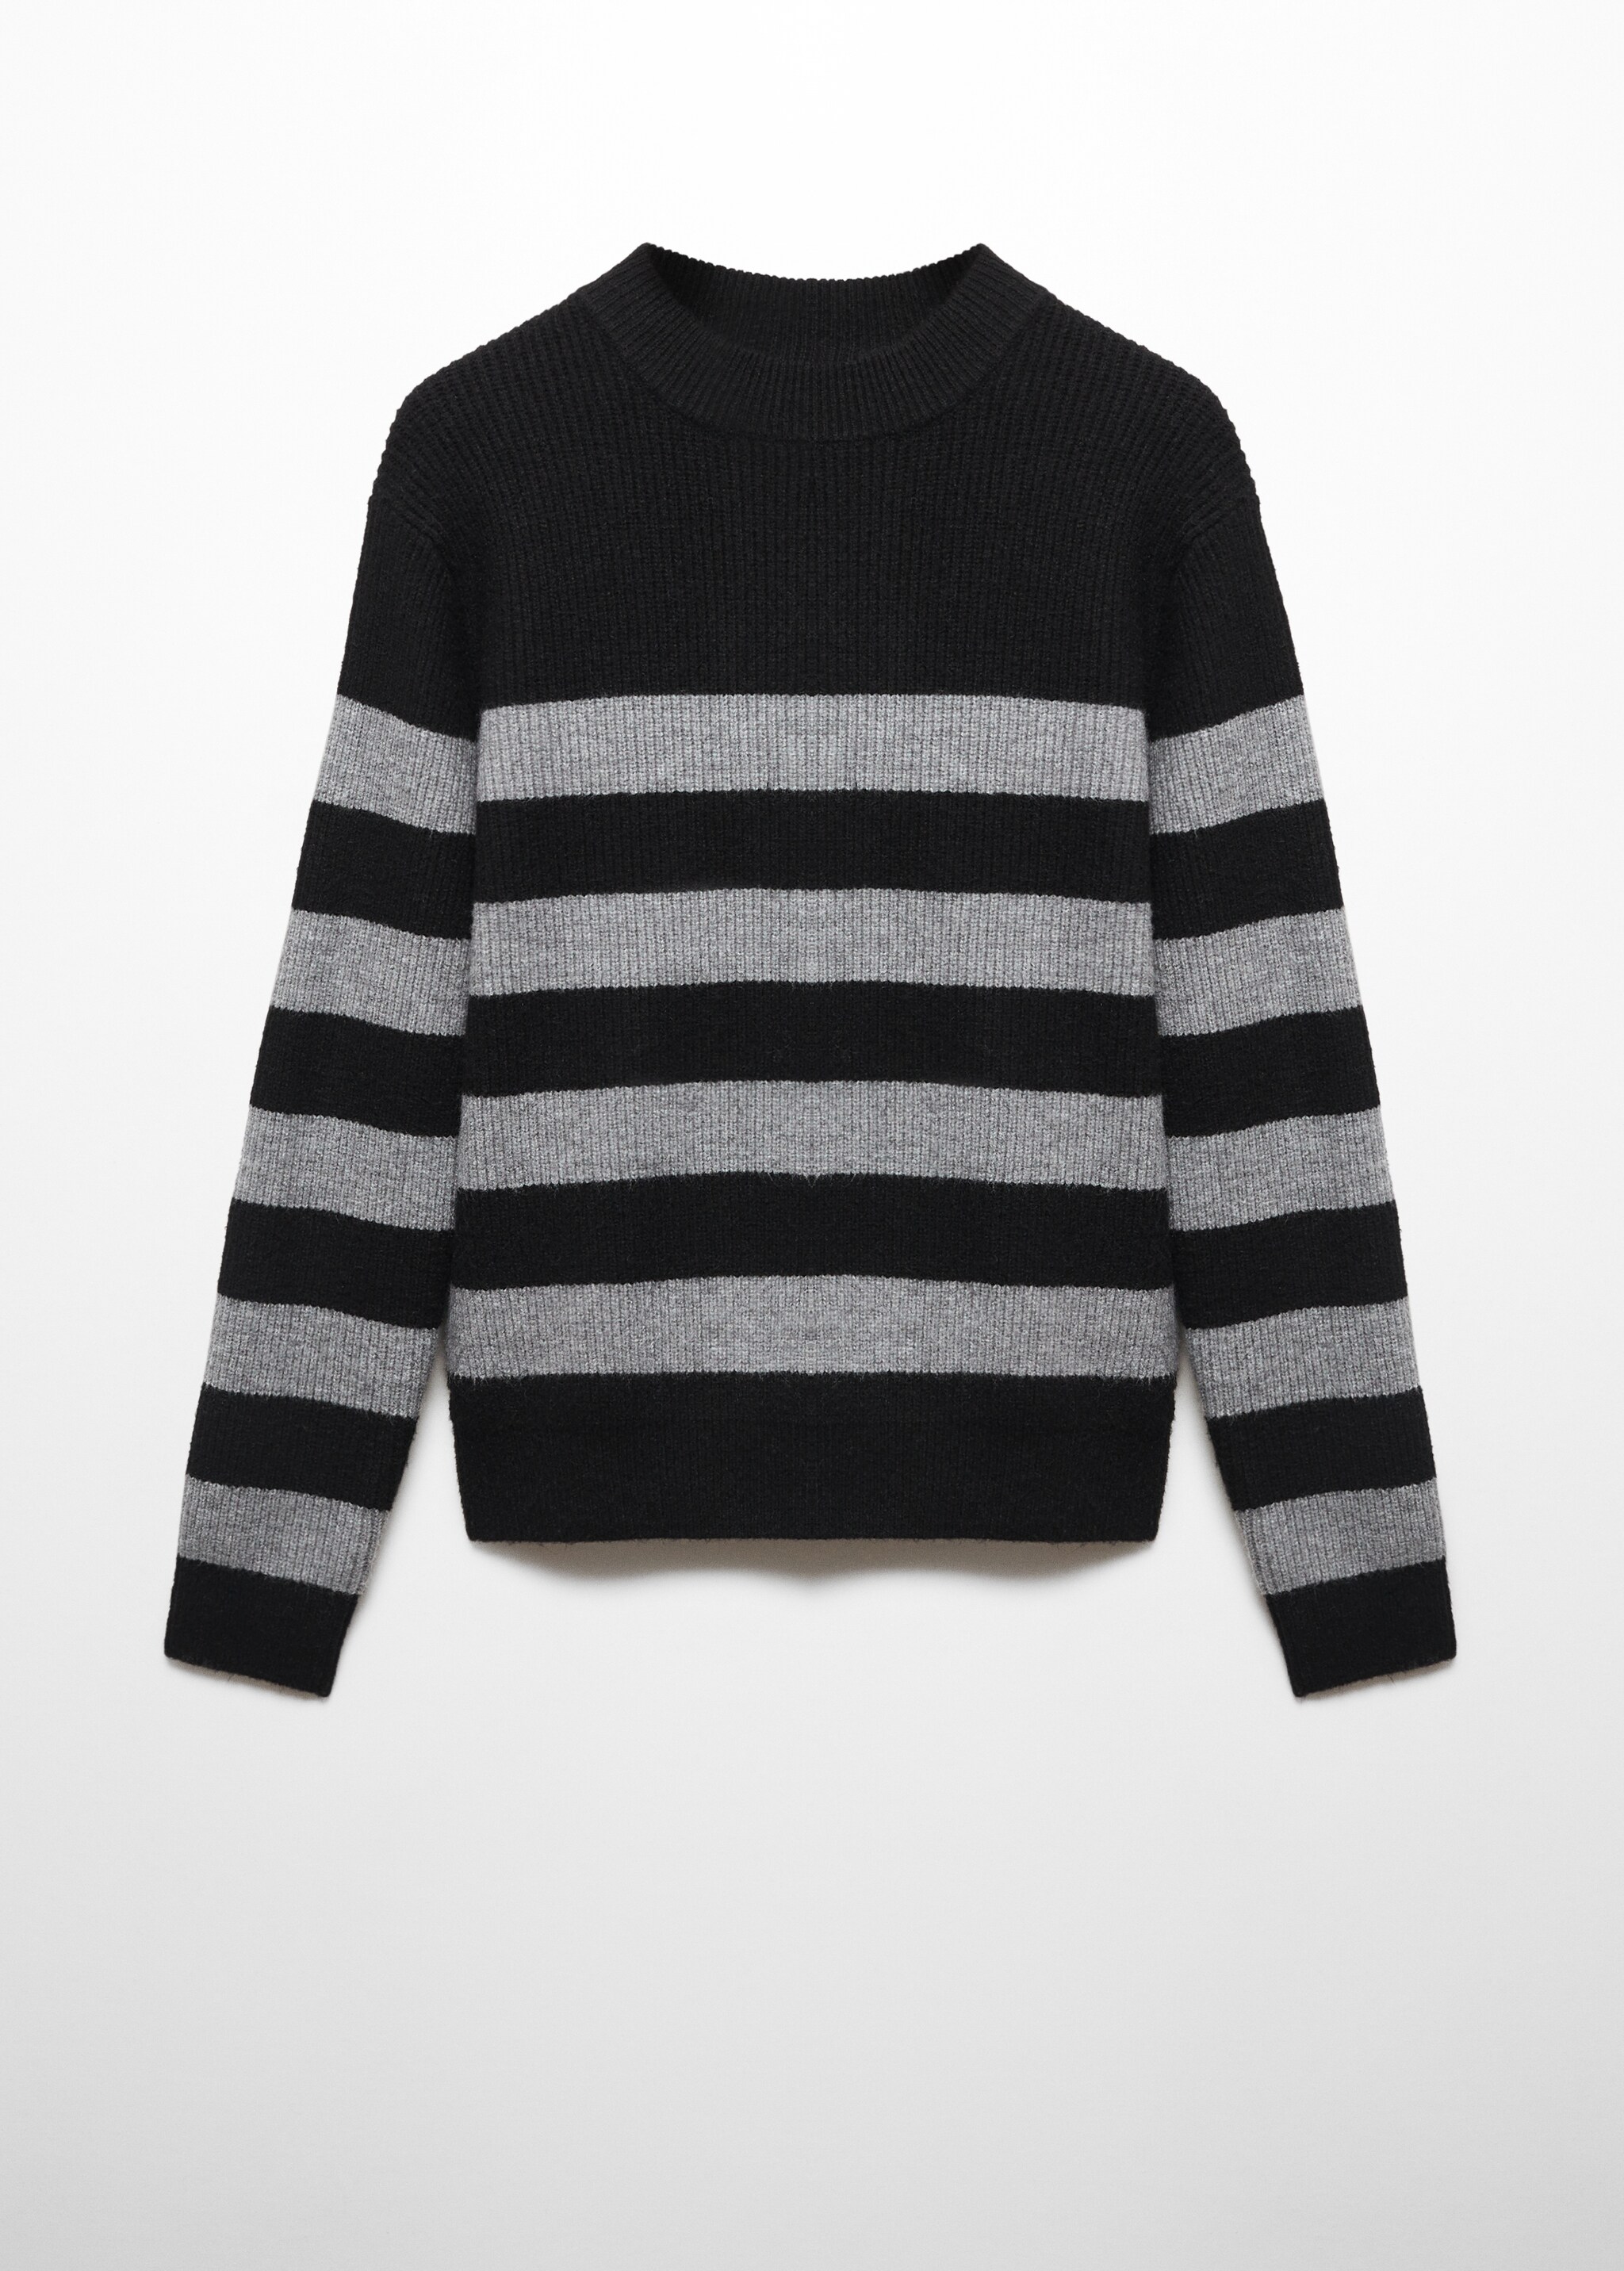 Striped perkins collar sweater - Article without model